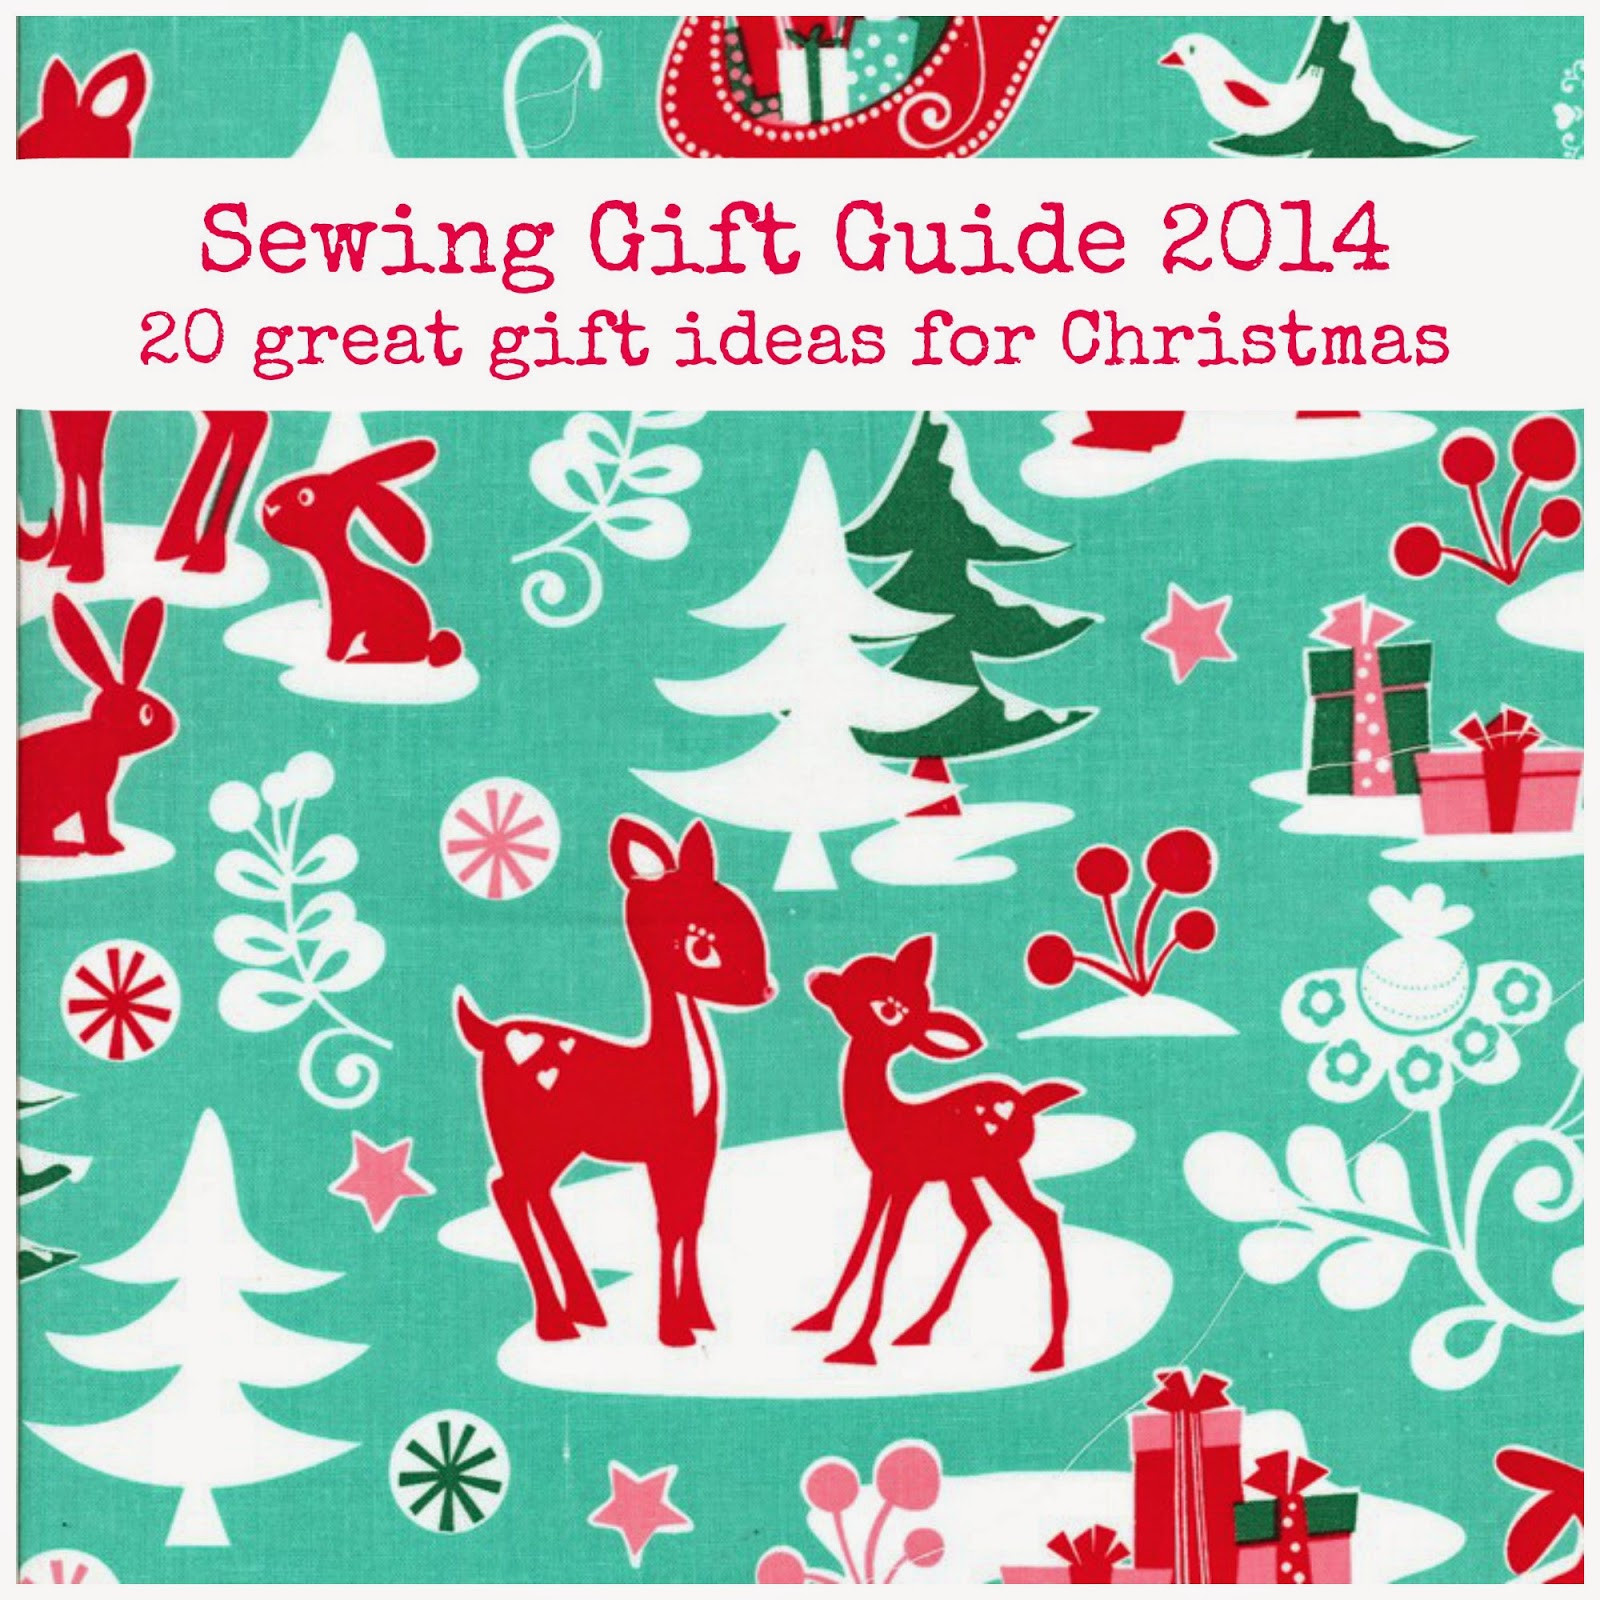 Sewing Christmas Gift Ideas
 Sew Scrumptious Christmas Sewing Gifts for 2014